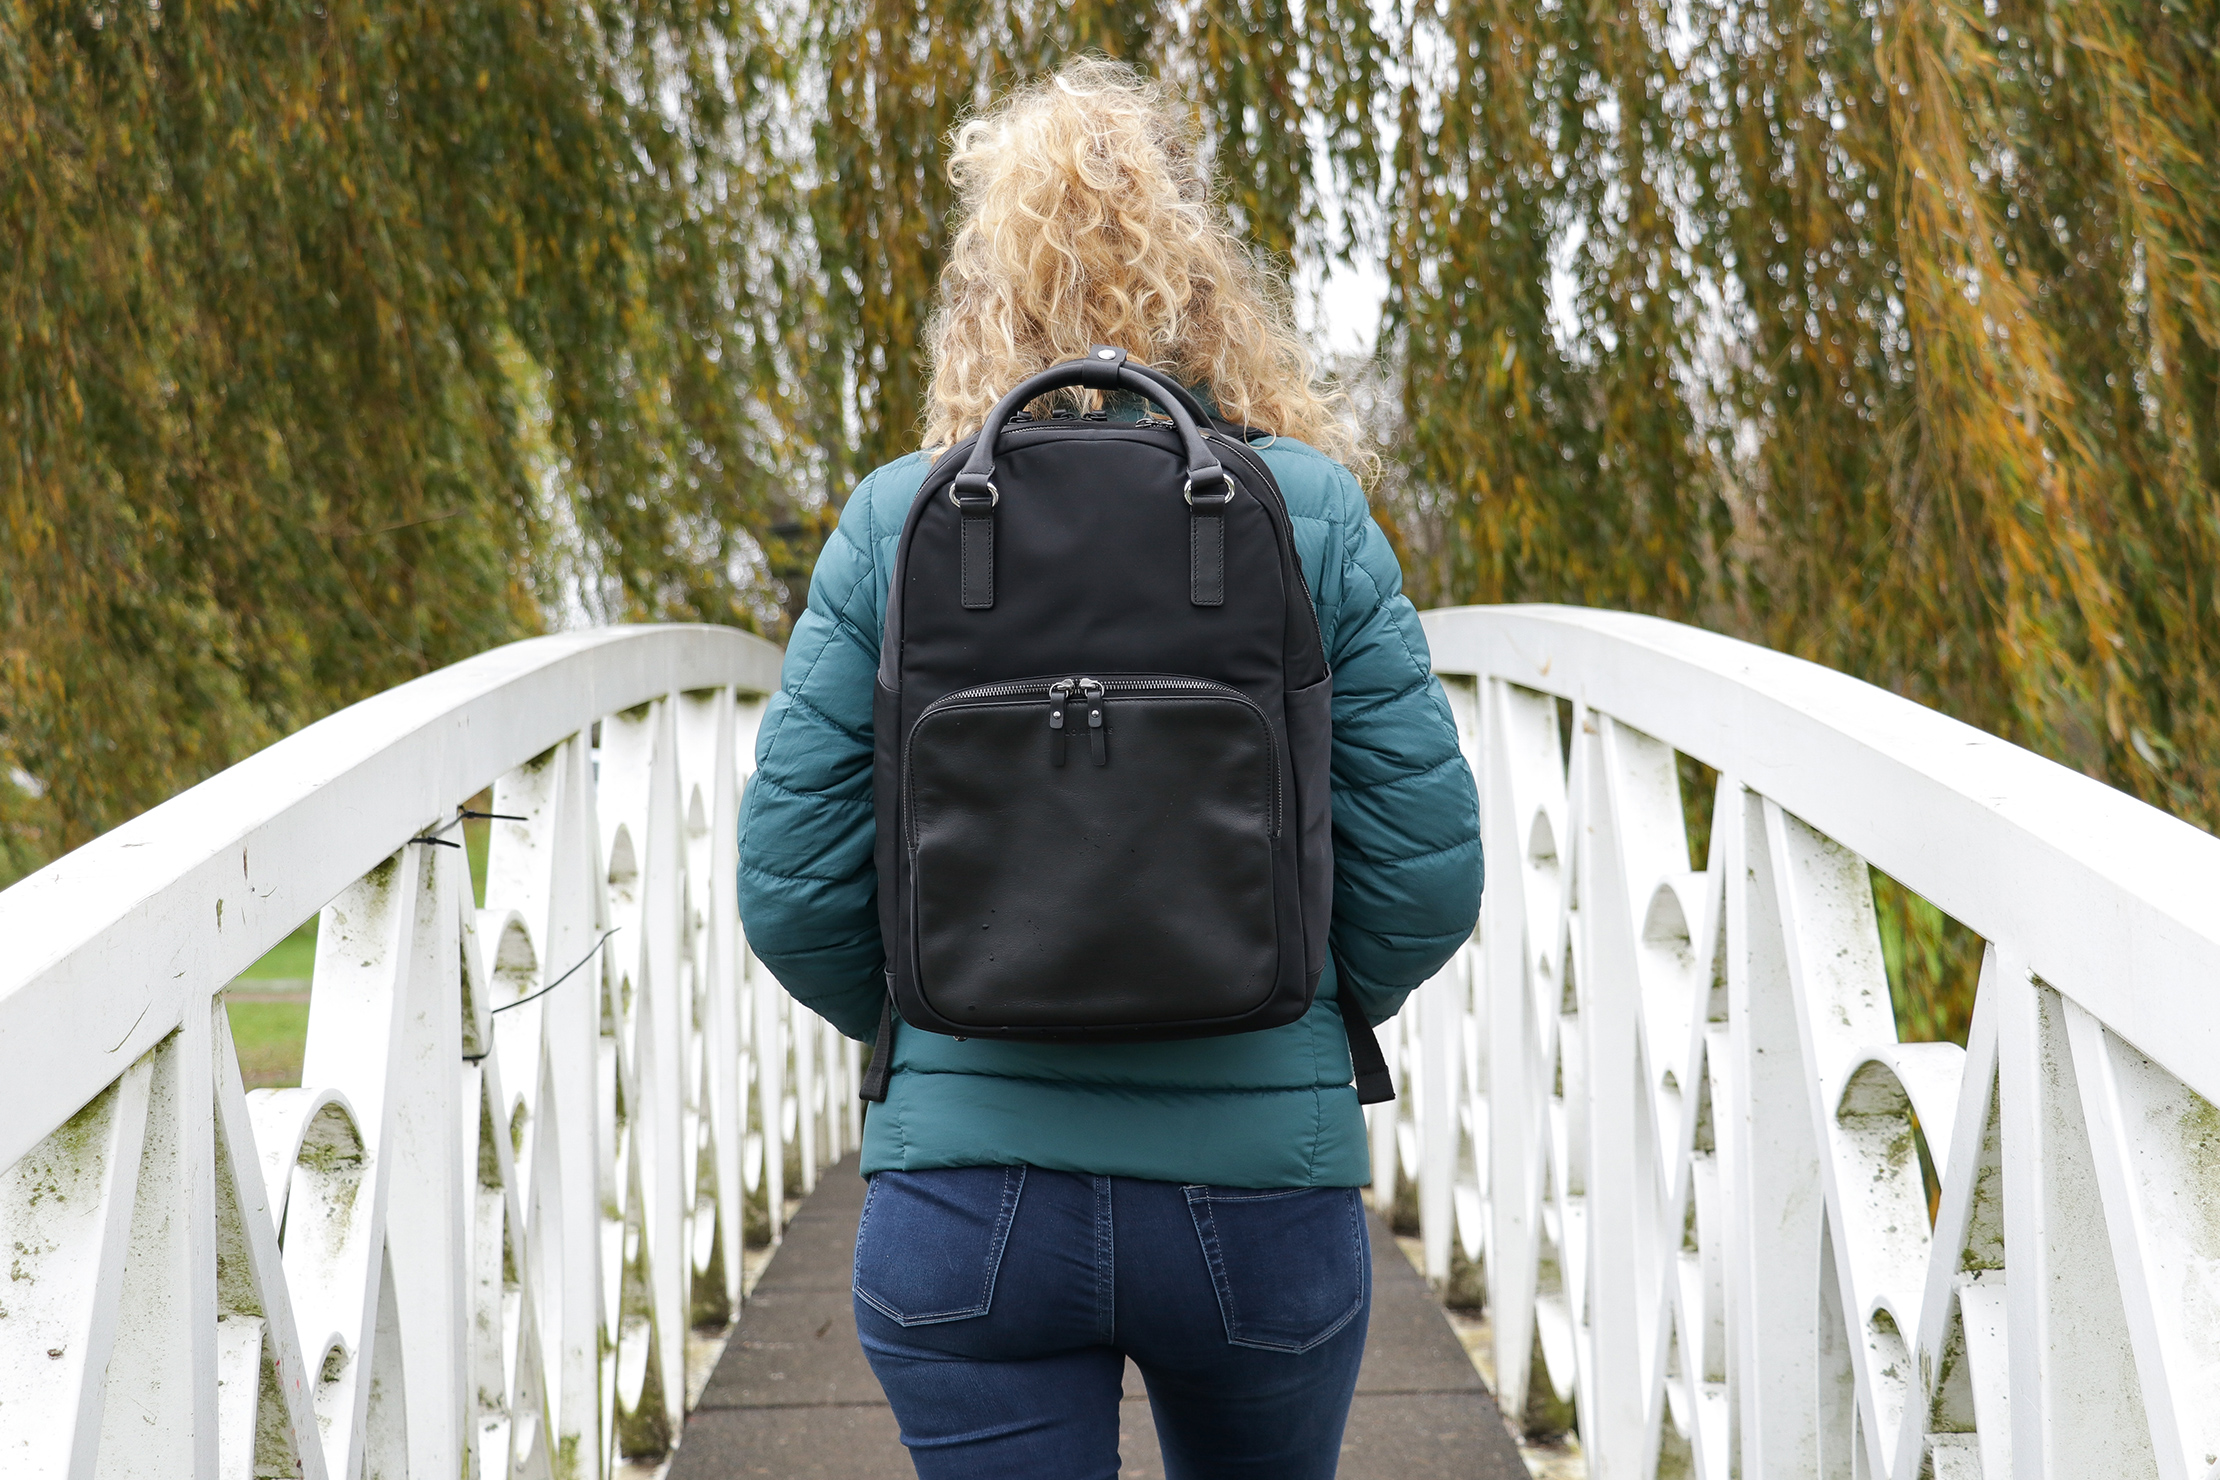 Lo & Sons Backpack Review: This Bag Makes Traveling With Two